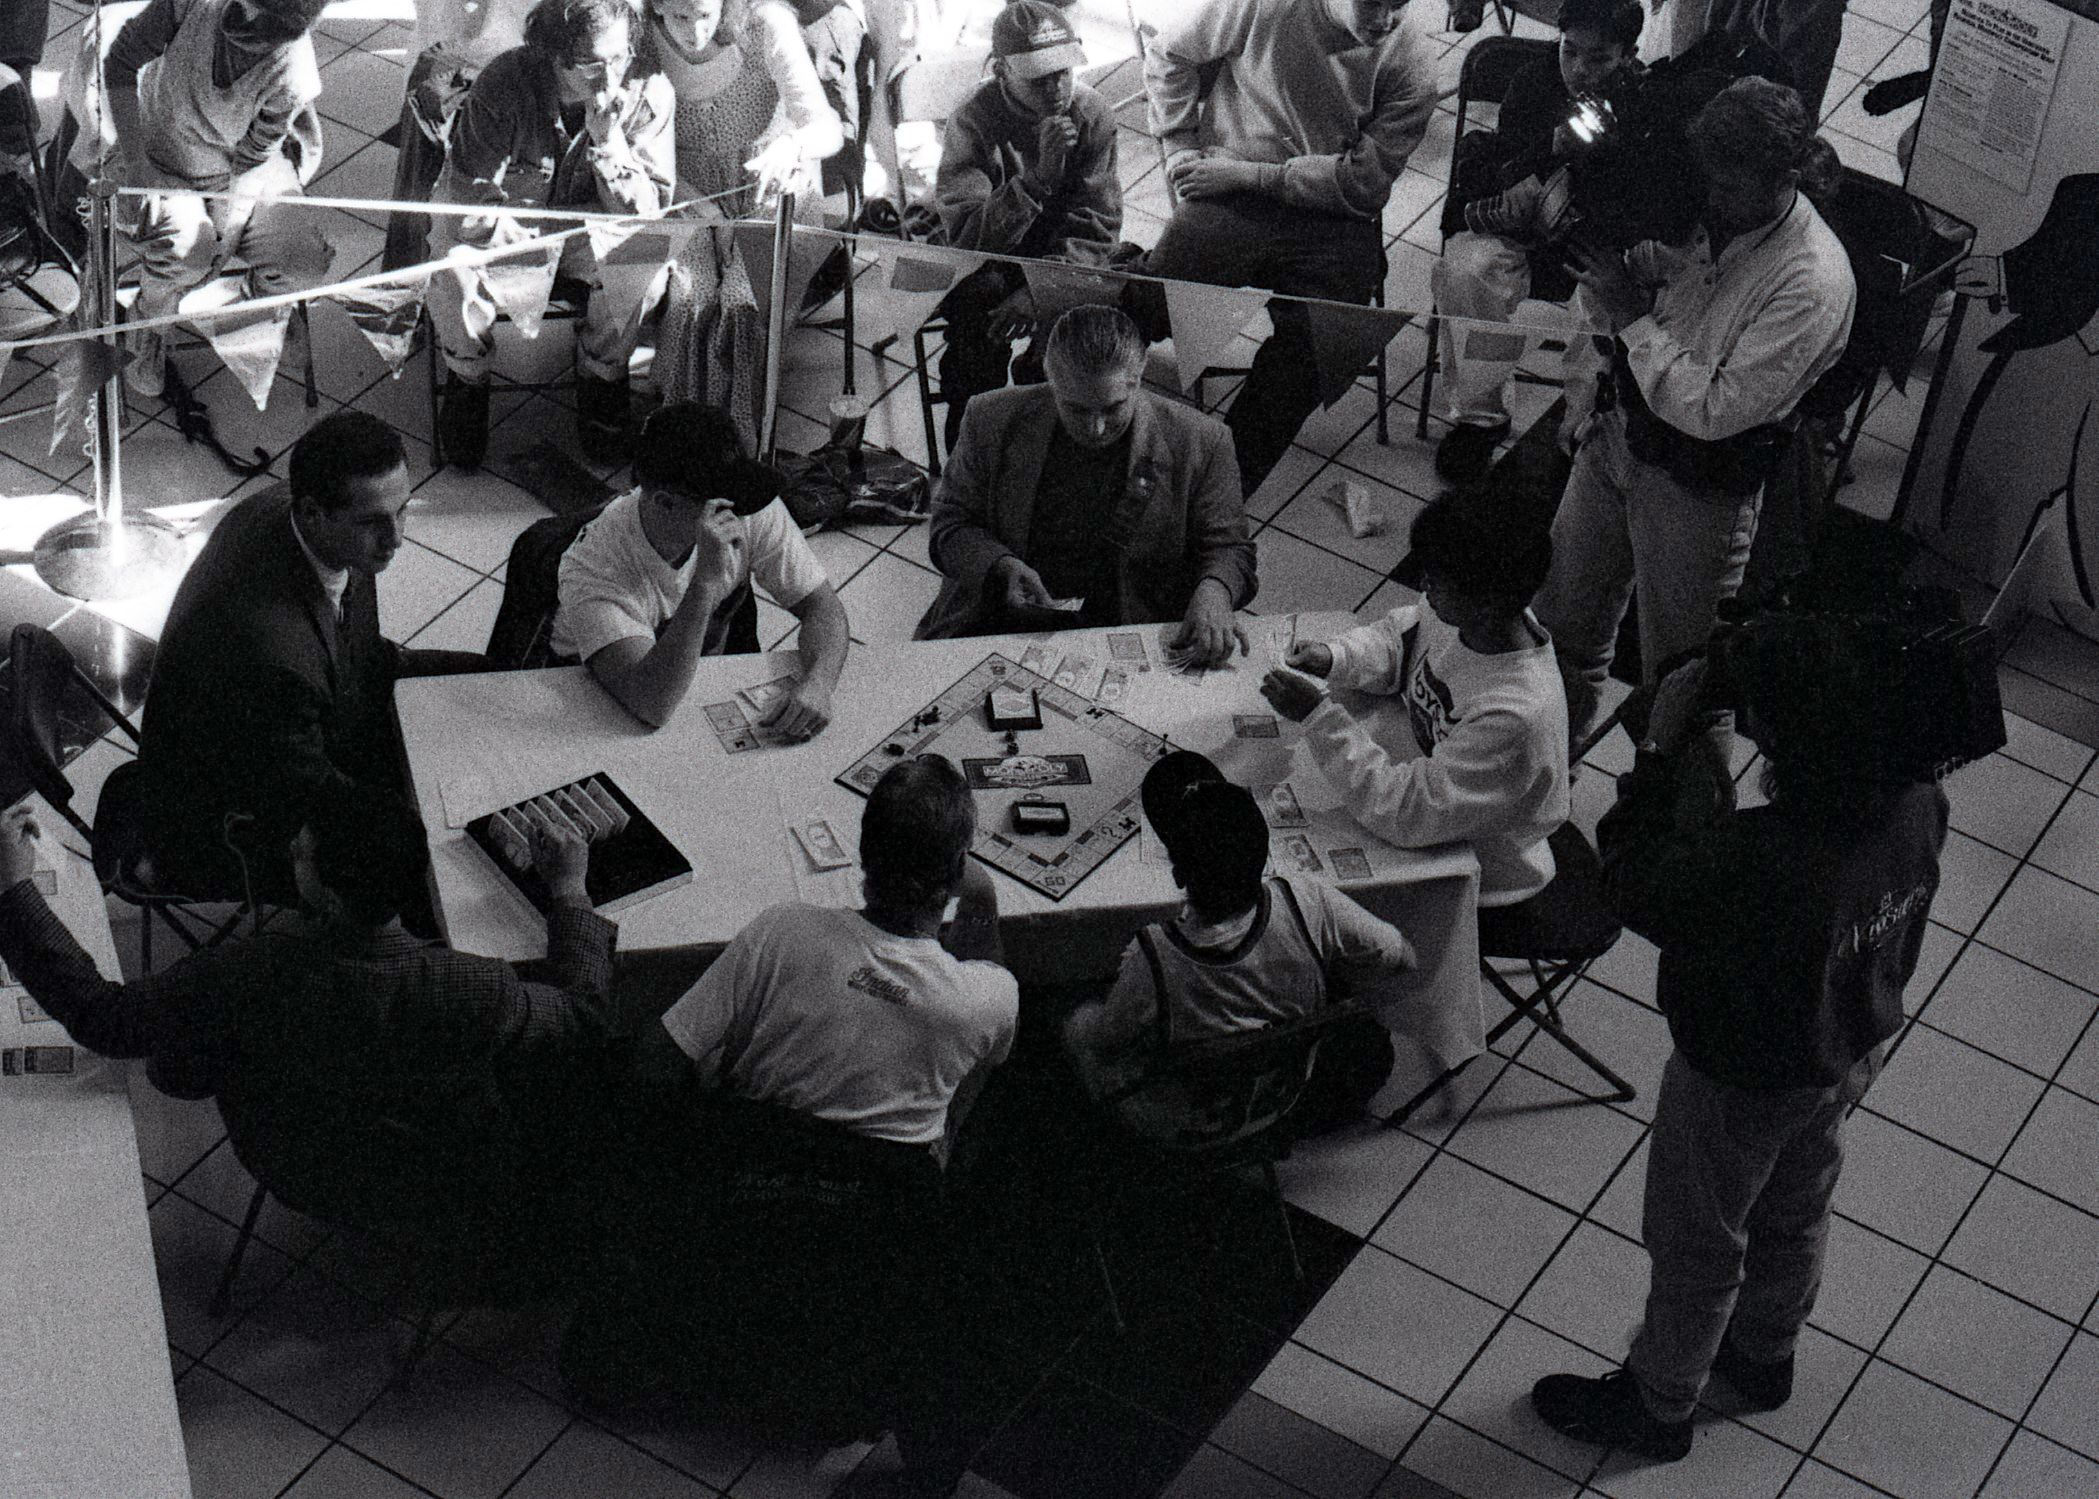 Regional Monopoly Championships at Coquitlam Centre, 1995 (JPG) Opens in new window